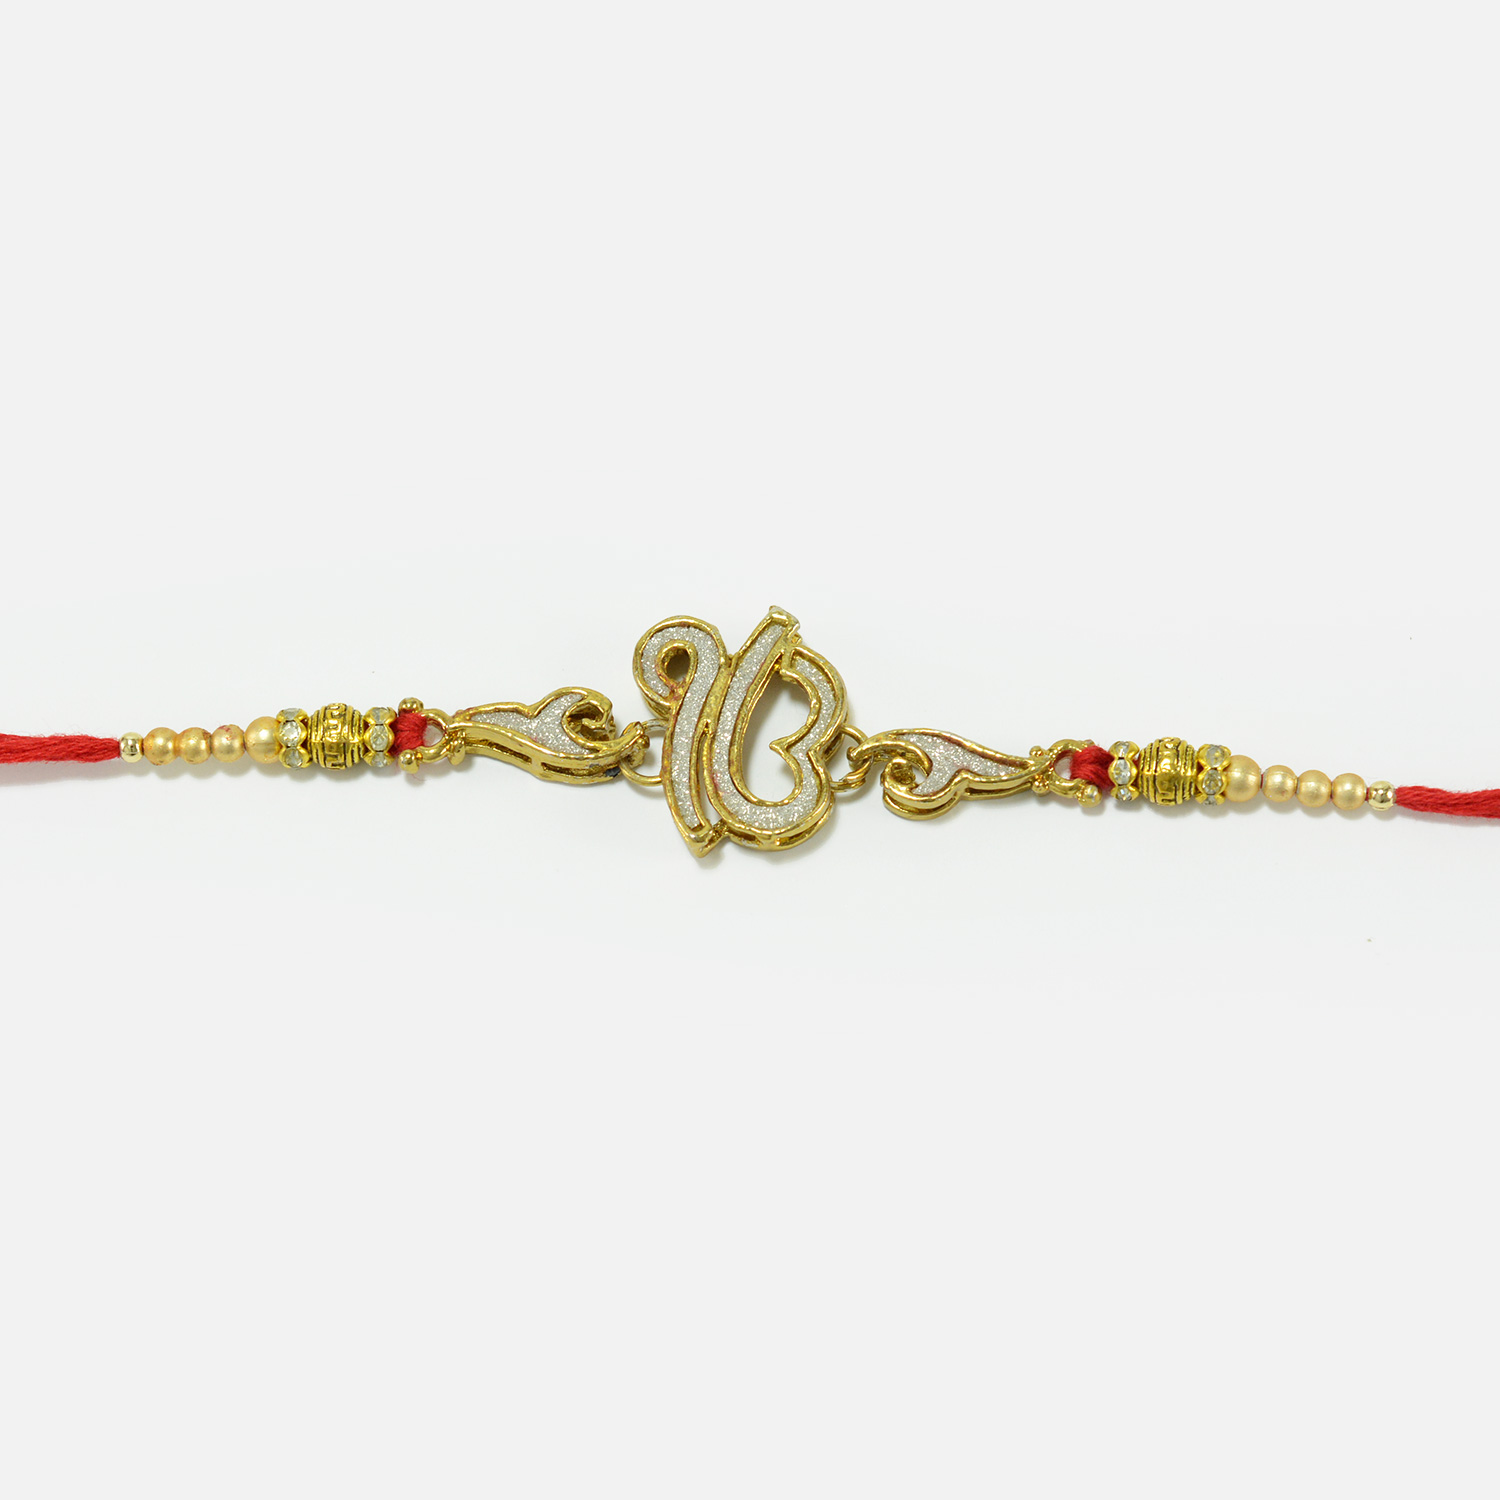 Sikh Special Attractive Looking Marvelous Ik Onkar Rakhi for Brother